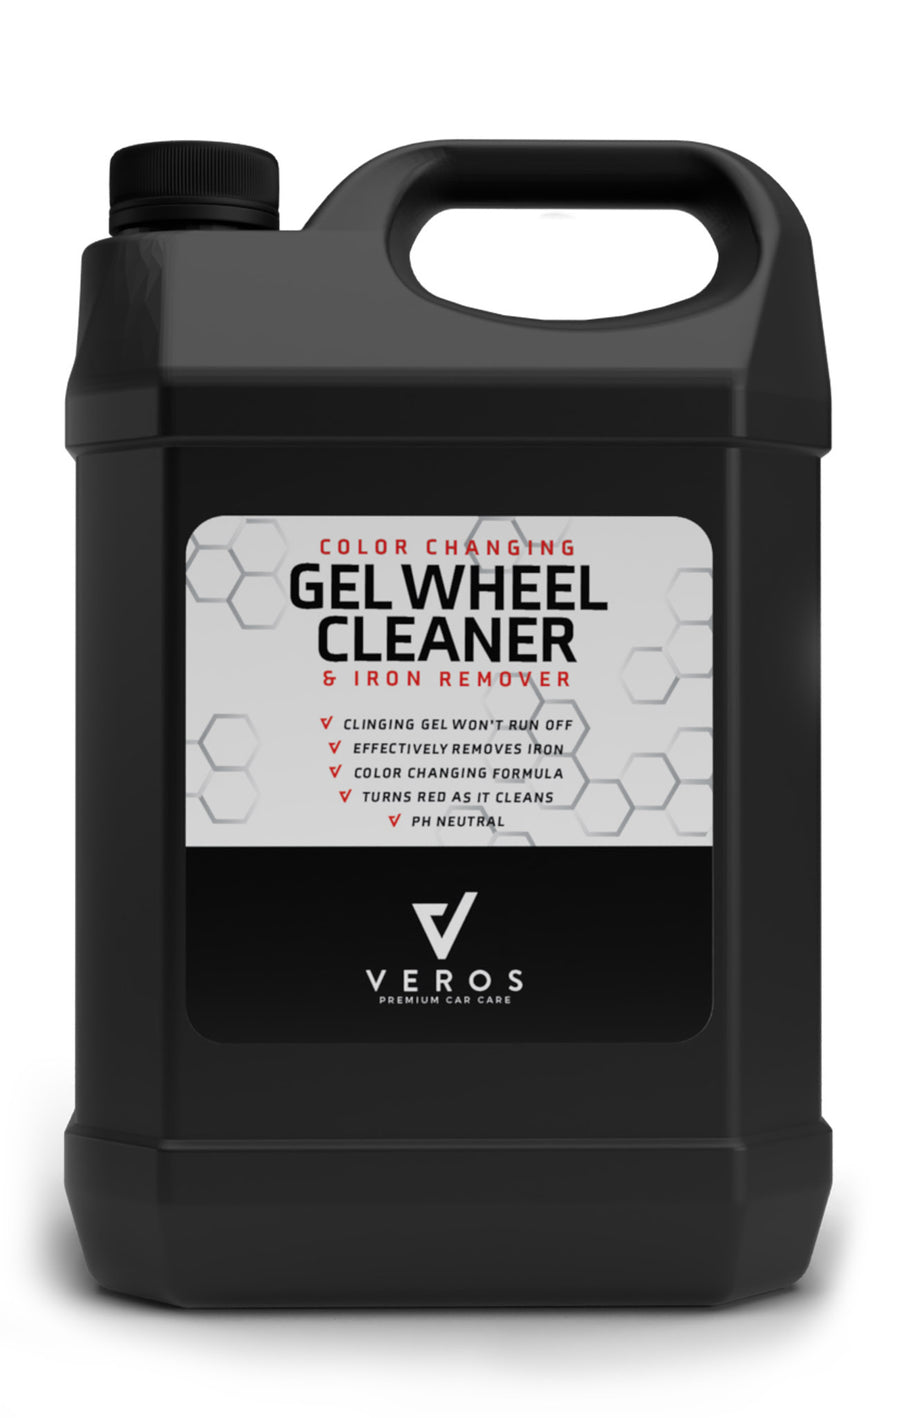 Gel Wheel Cleaner and Iron Remover